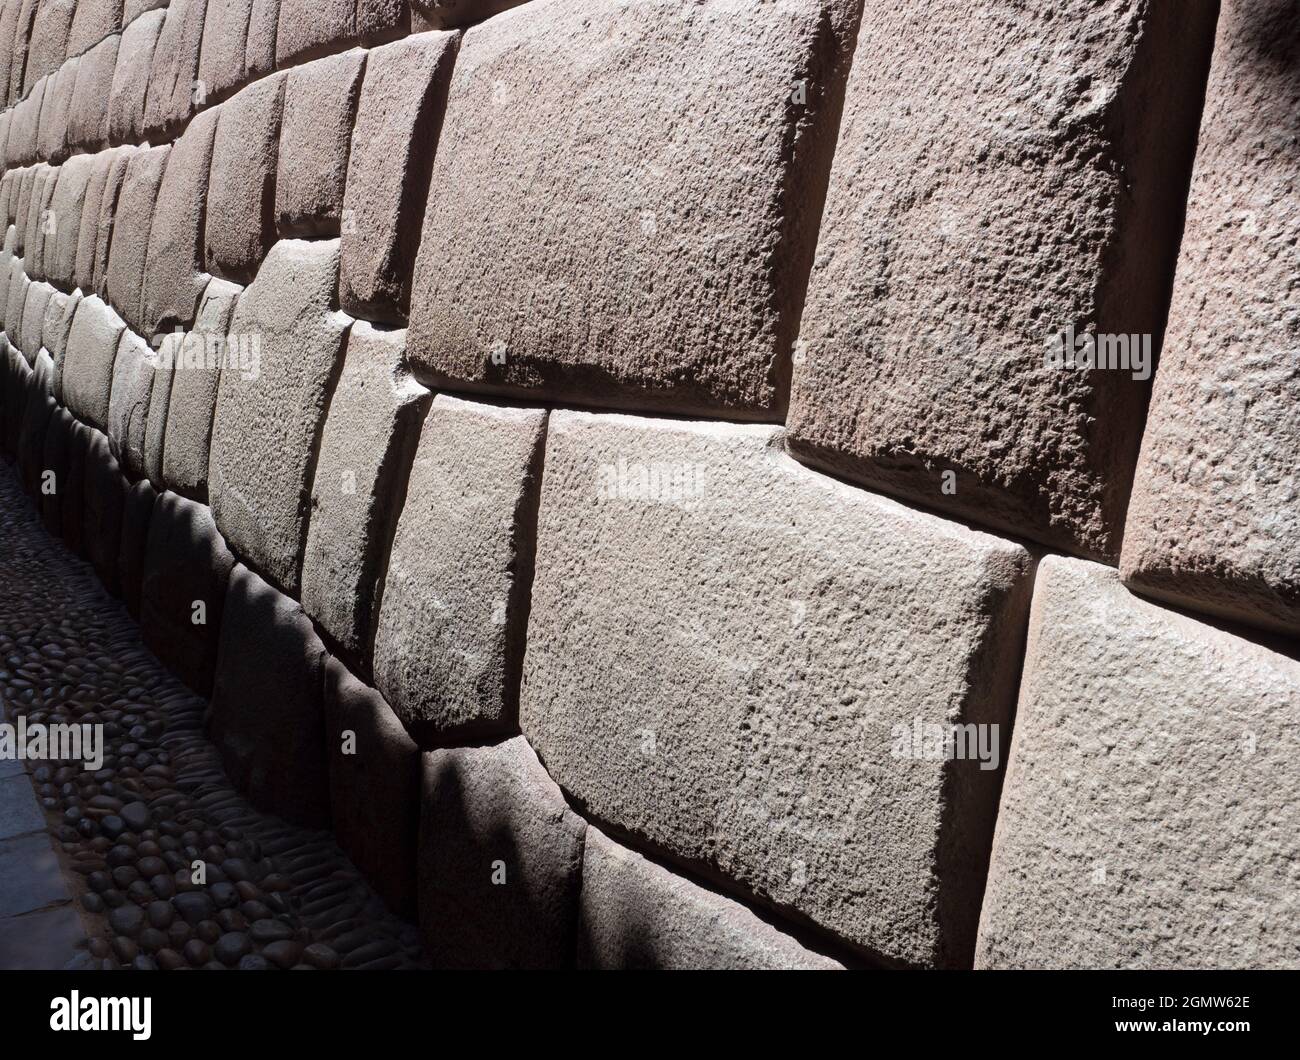 Cusco, Peru- 8 May 2018 Cusco was and remains the focus of Inca culture and civilisation in Peru. Here we see one of the stunning Inca walls in the ci Stock Photo